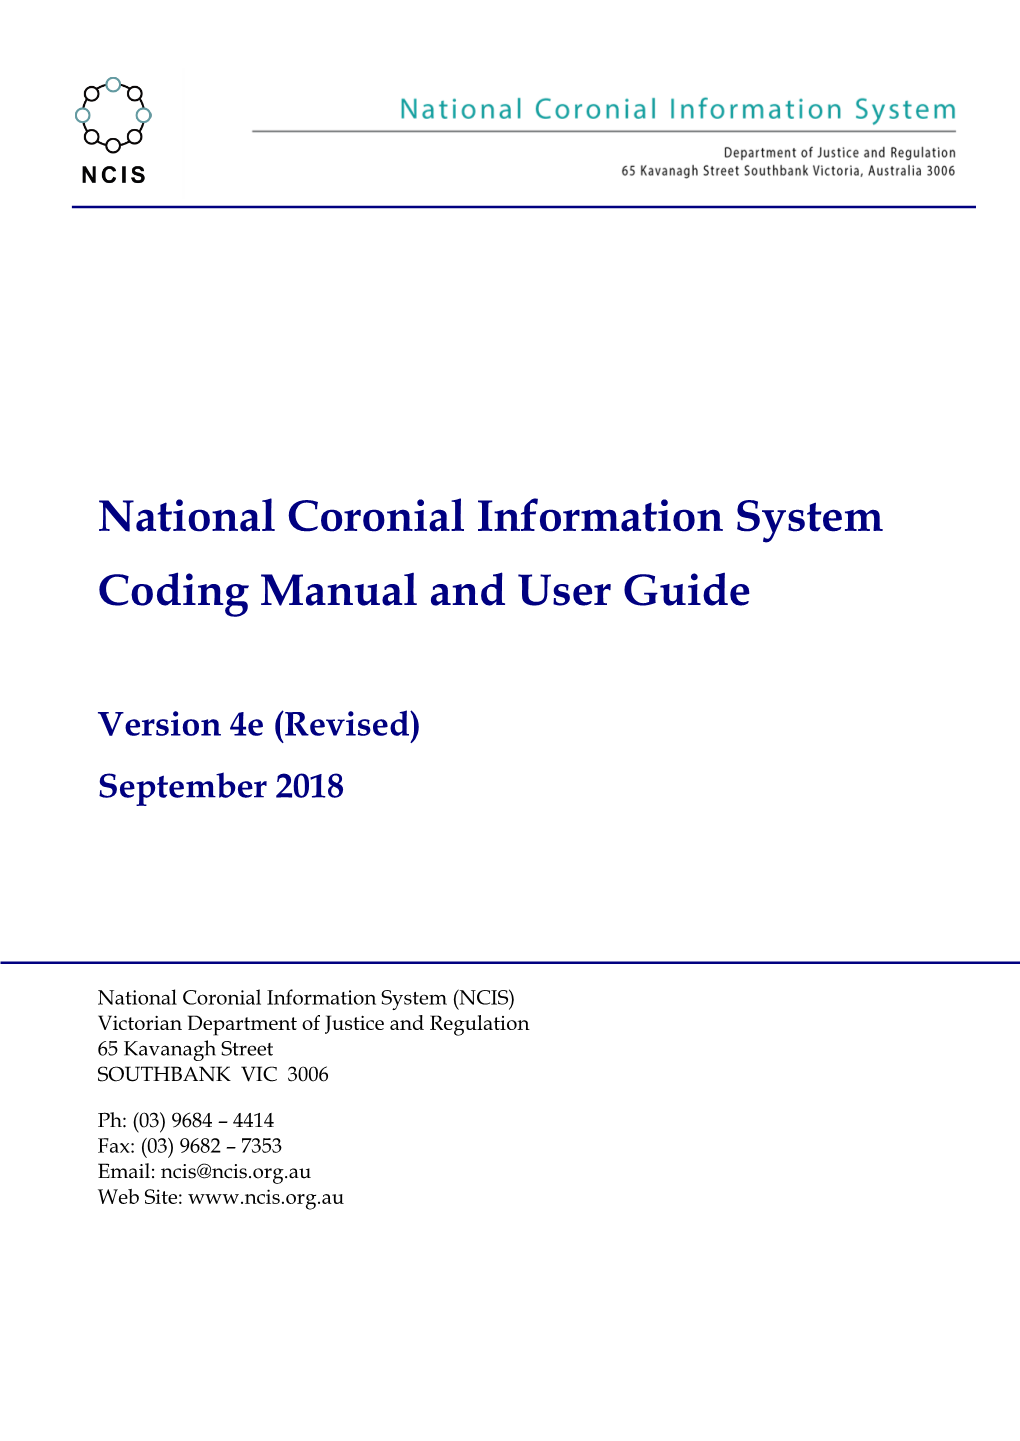 National Coronial Information System Coding Manual and User Guide